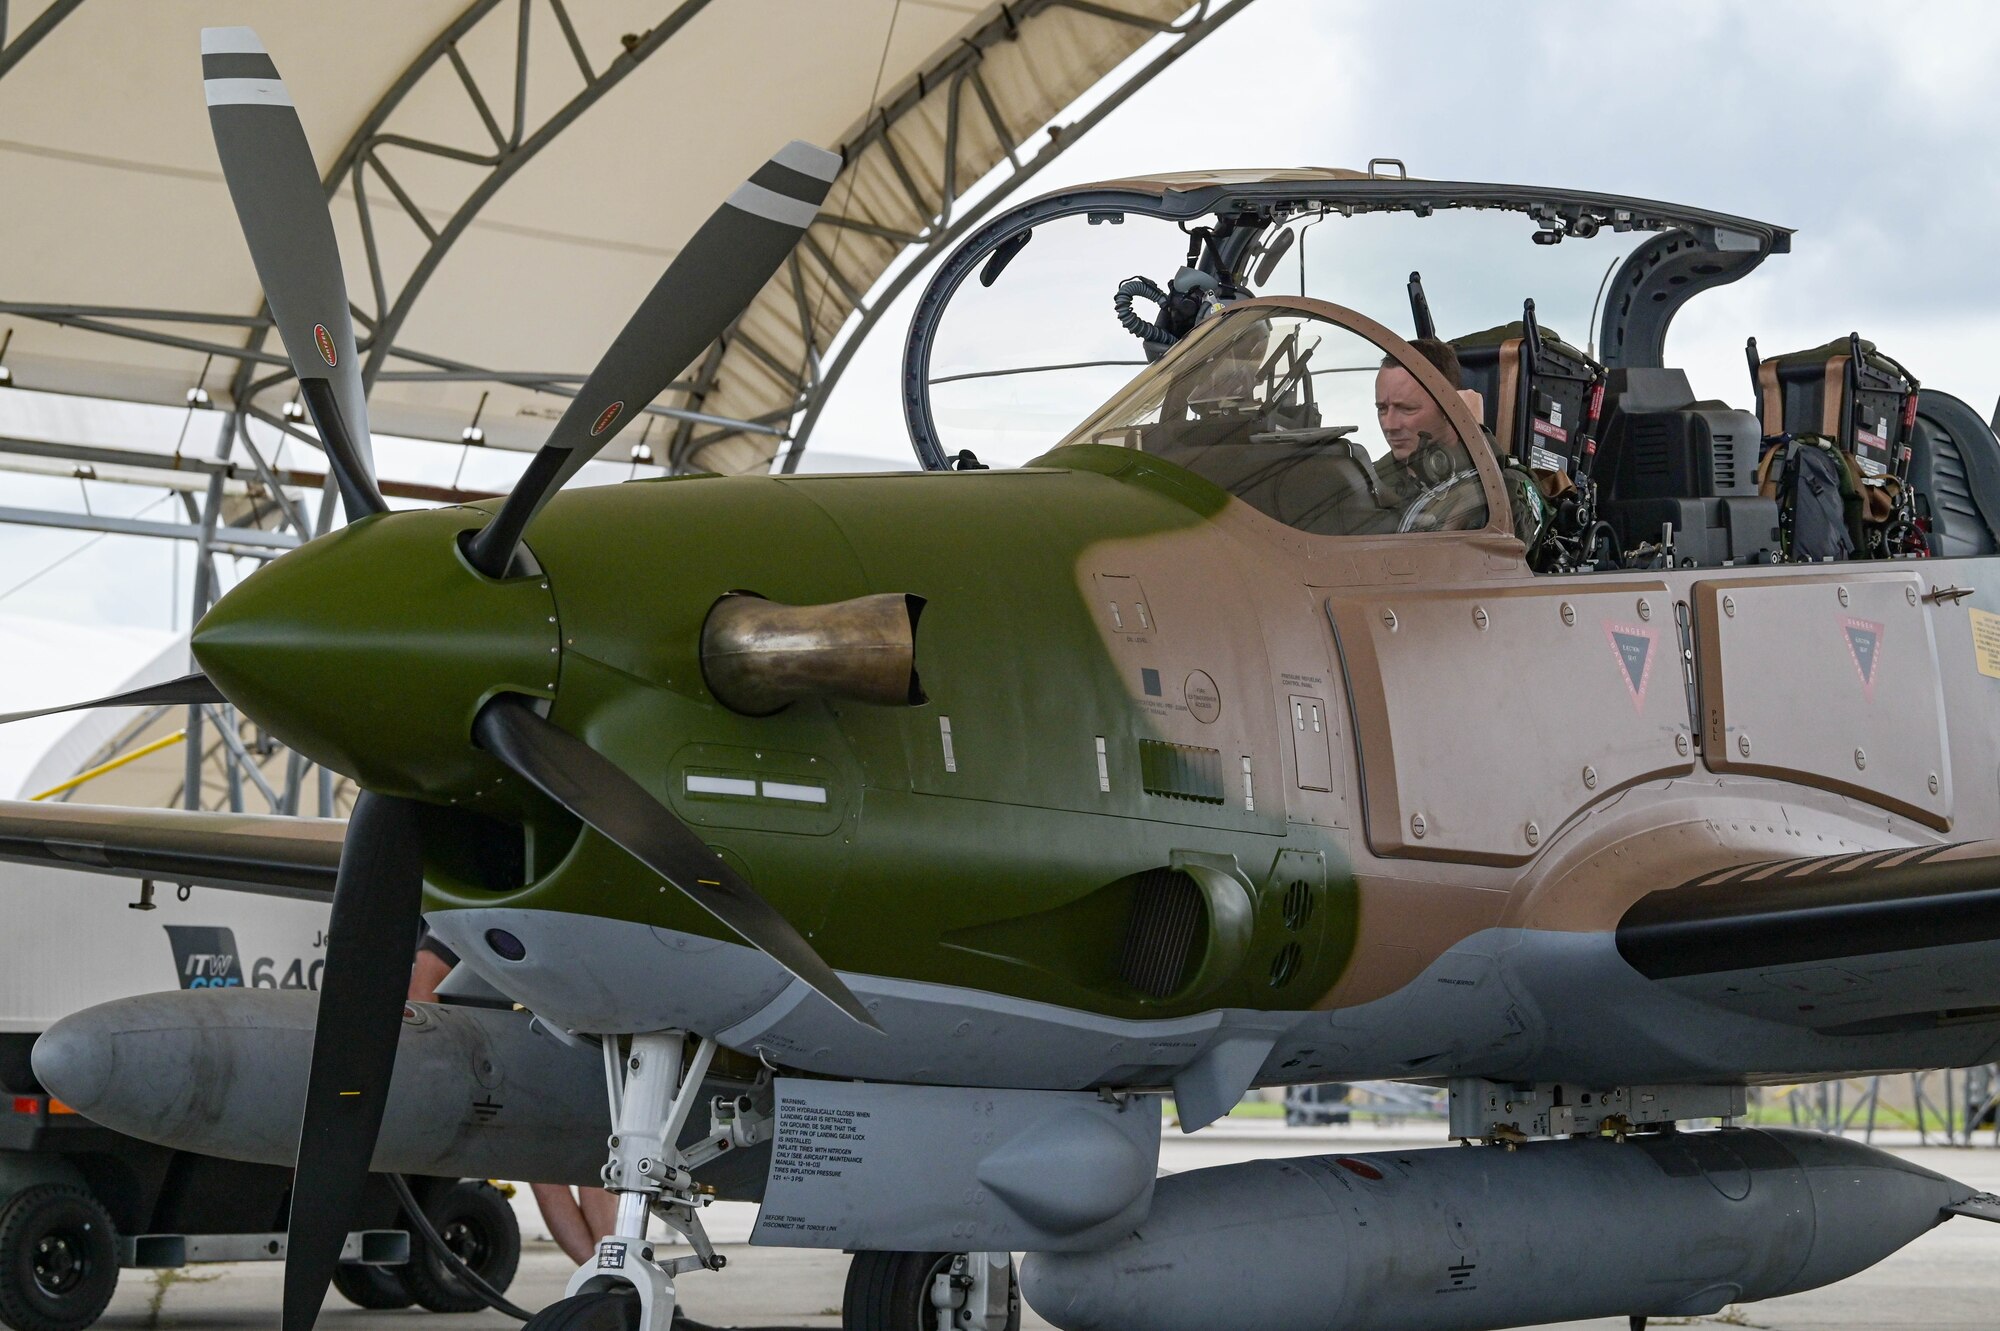 An A-29 Super Tucano aircraft pilot from the 81st Fighter Squadron performs a preflight inspection at Moody Air Force Base, Georgia, Sept. 15, 2021. Nigeria purchased the A-29s through the Foreign Military Sales program, following the Department of Defense’s “Total Package Approach” model. The nearly $500 million sale is the largest FMS program in sub-Saharan Africa. (U.S. Air Force photo by Senior Airman Rebeckah Medeiros)